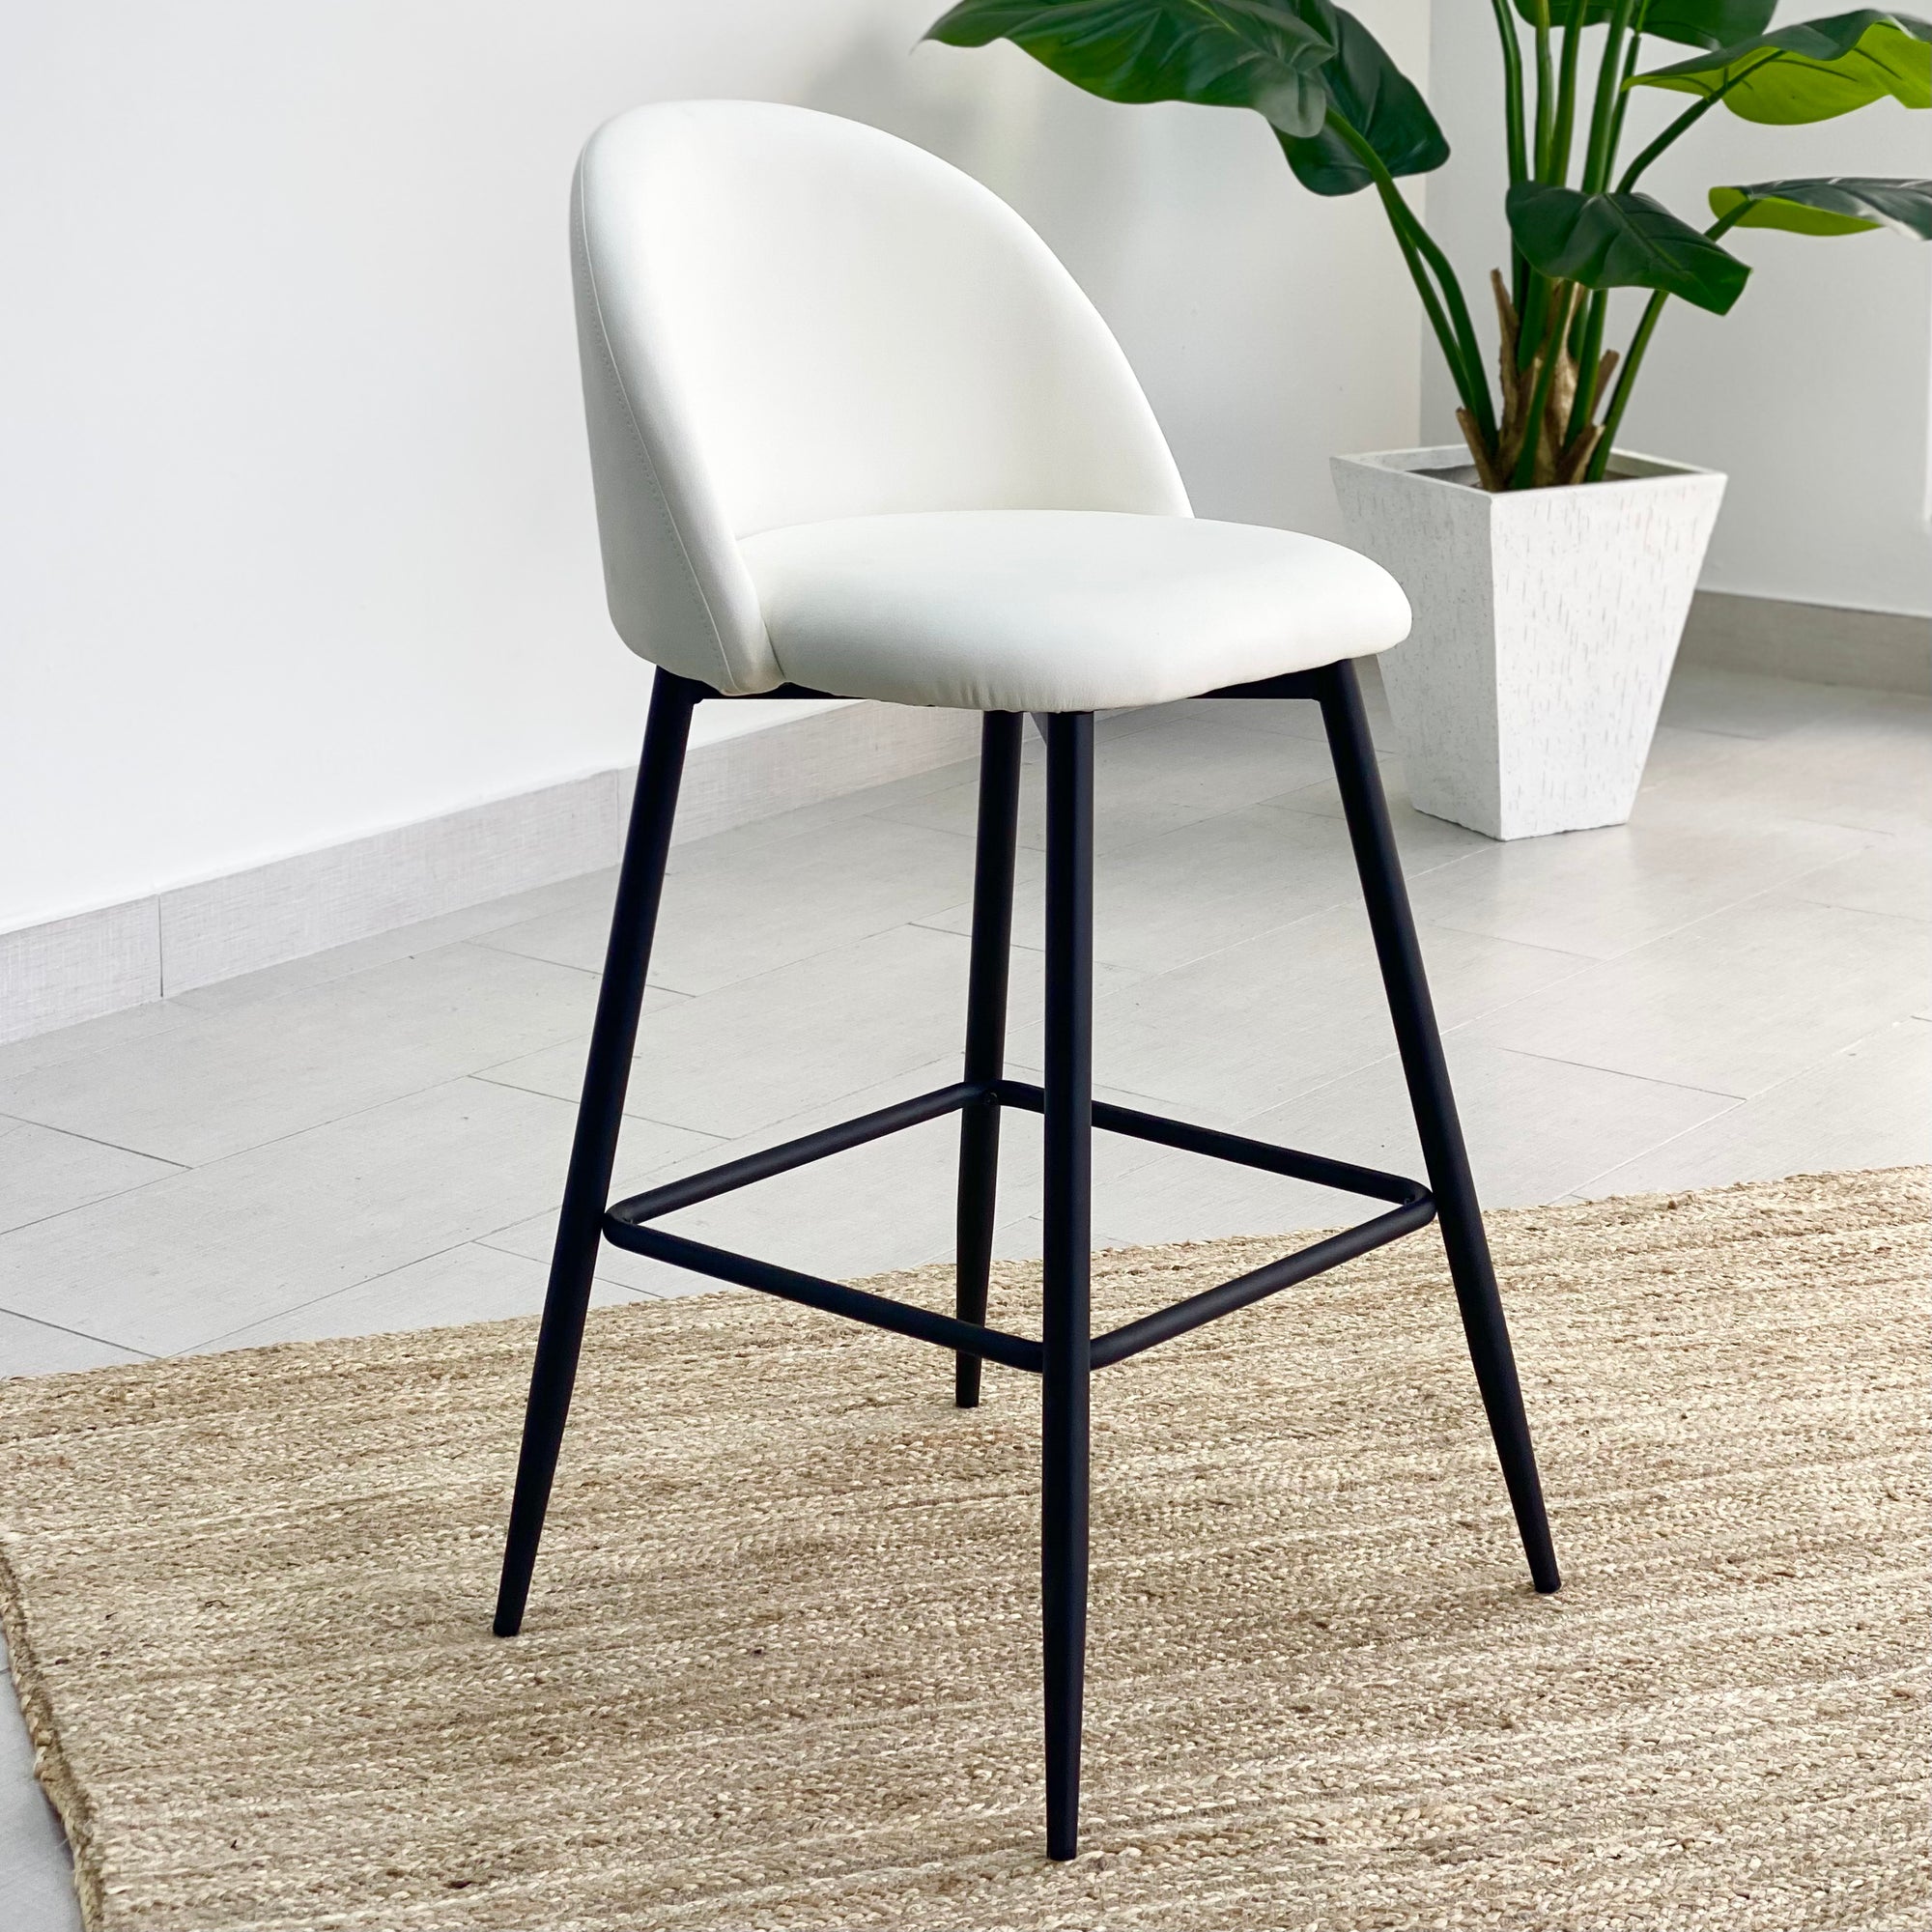 Archway White Faux Leather Stool